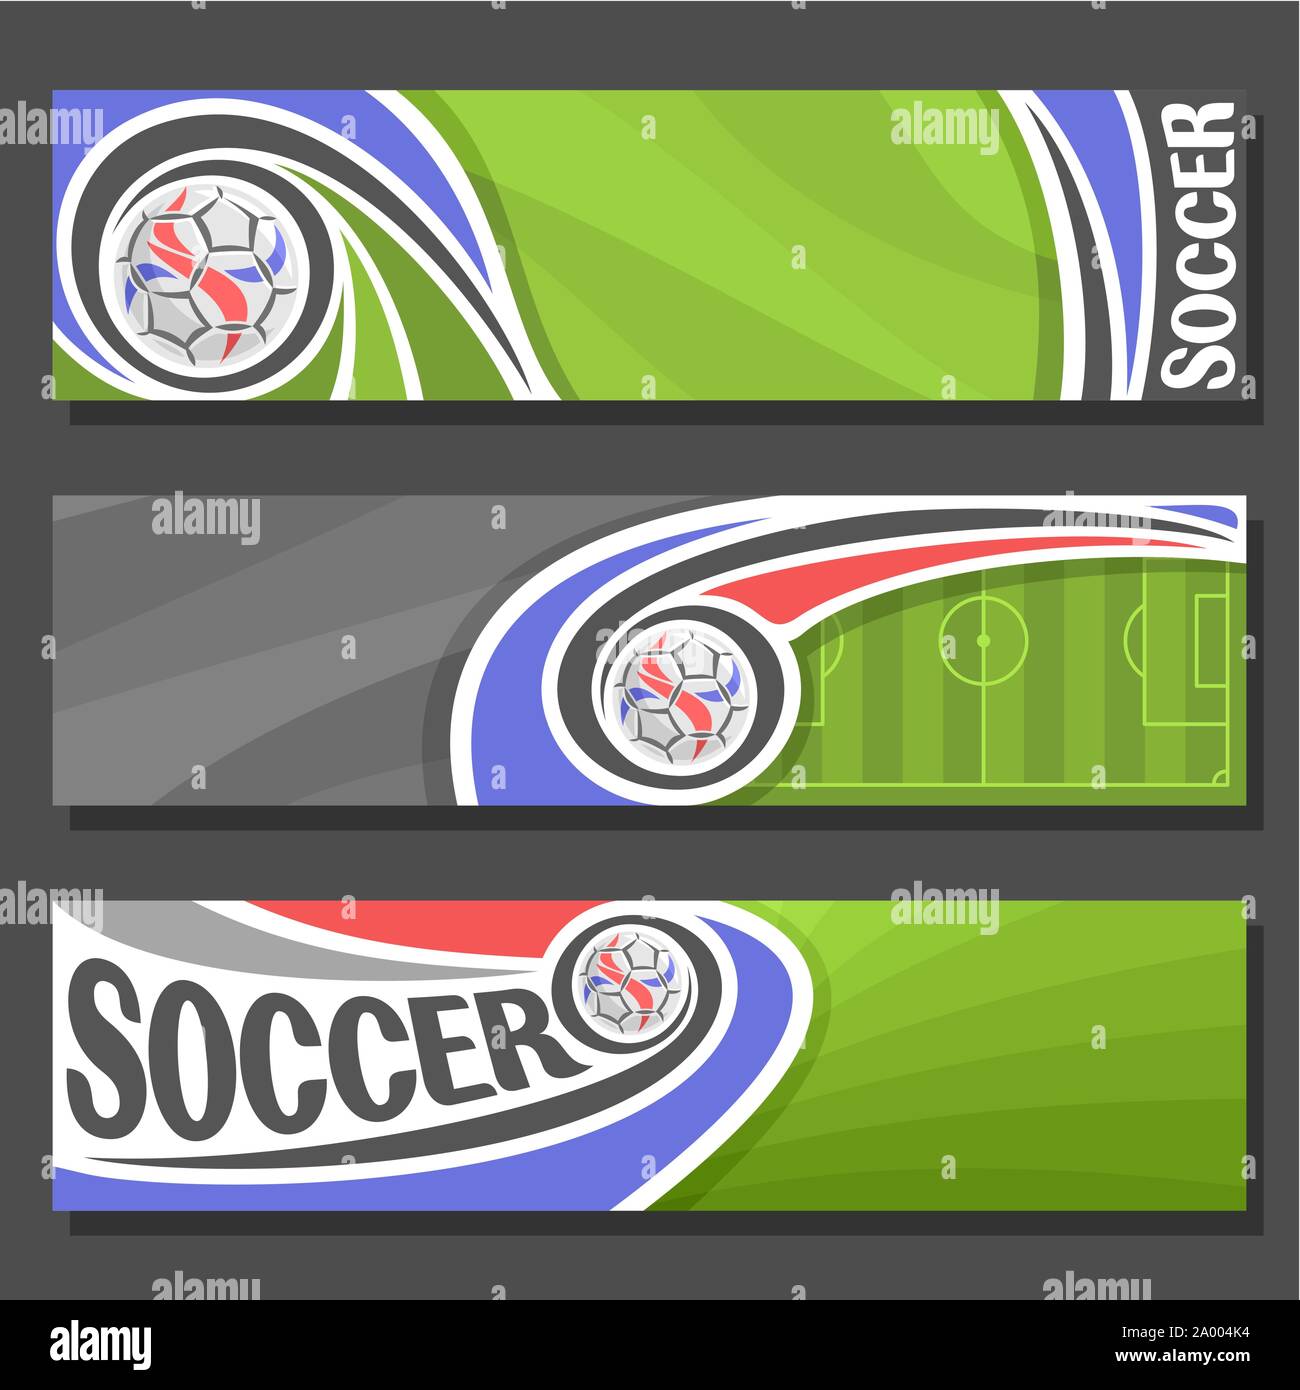 Vector Banners for Soccer: 3 layouts for title on soccer theme, green sports football field top view, soccer ball flying on curve trajectory in goal, Stock Vector